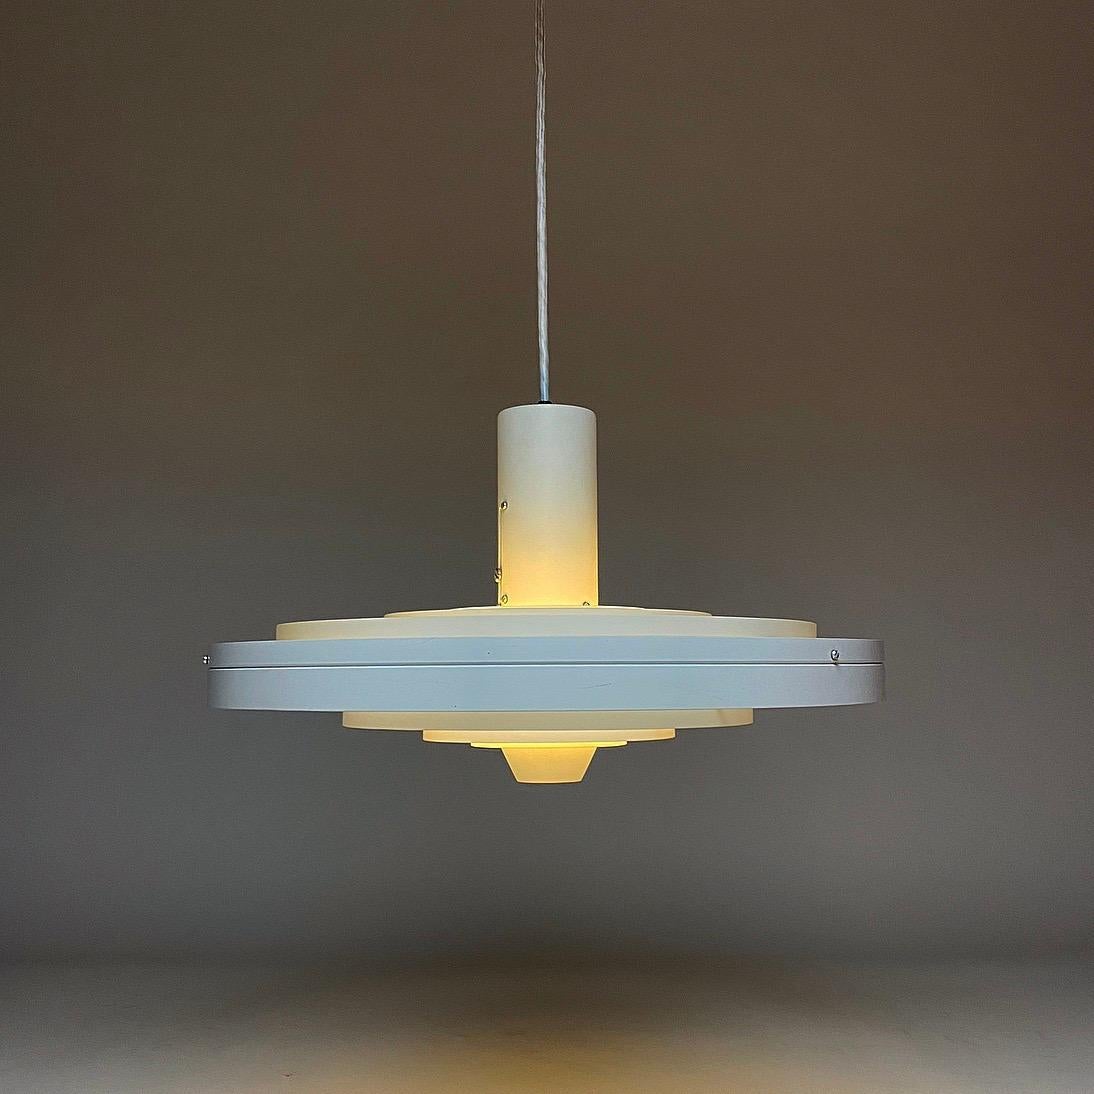 Rather special today to find a well conditioned Fibonacci by Sophus Frandsen for Fog & Mørup, Denmark, 1963.

An award winning design icon has found its way to our shop and is looking for a new home. 

Sophus Frandsen designed the Fibonacci lamp